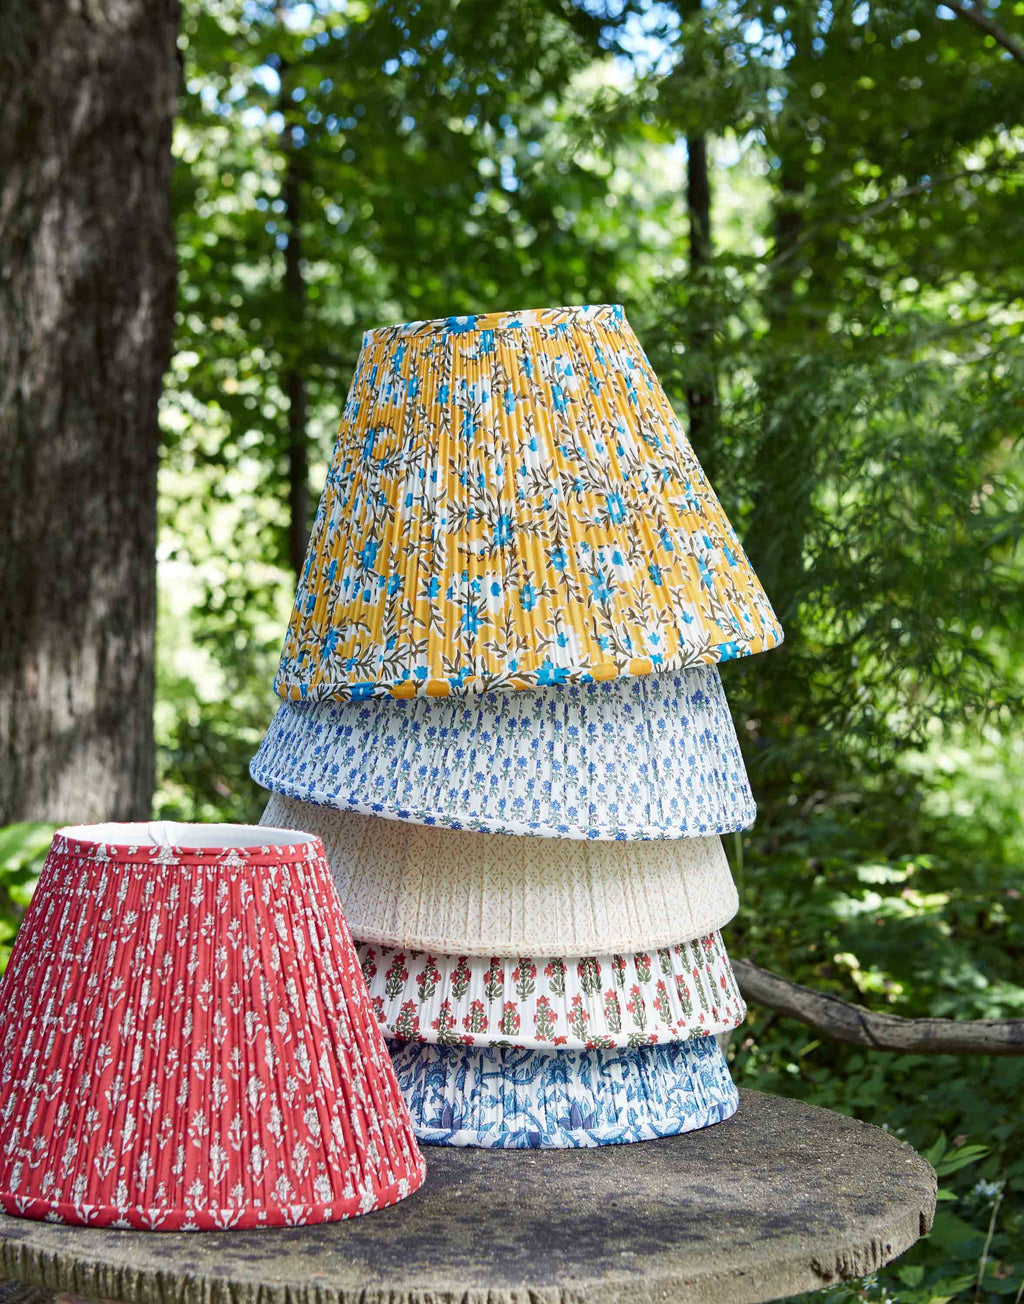 southern blues lampshade